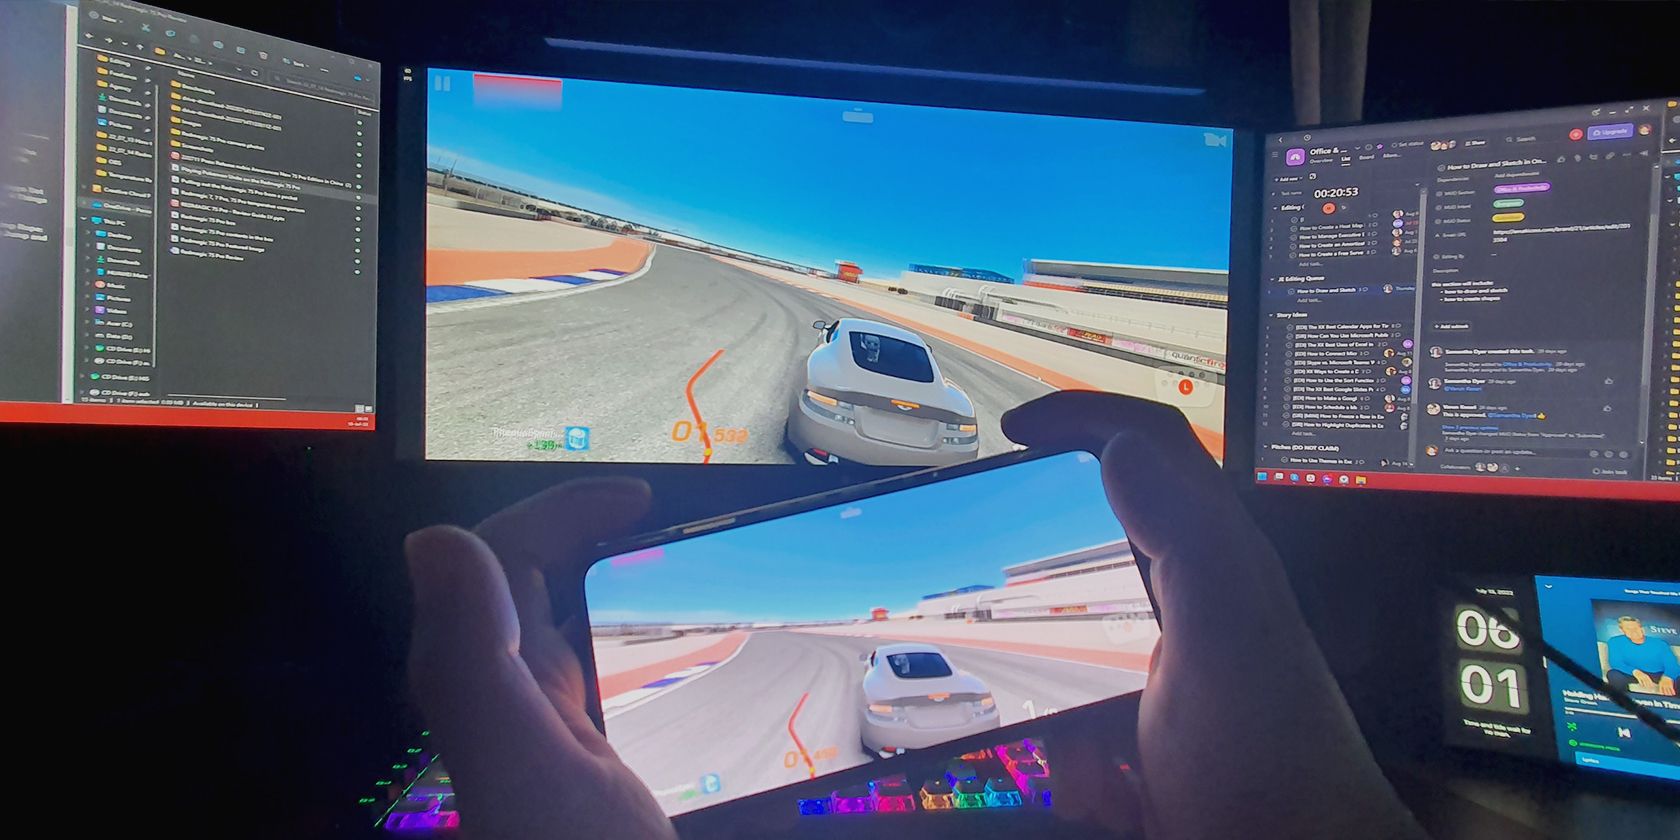 Casting Real Racing 3 from the Redmagic 7S Pro to a PC monitor